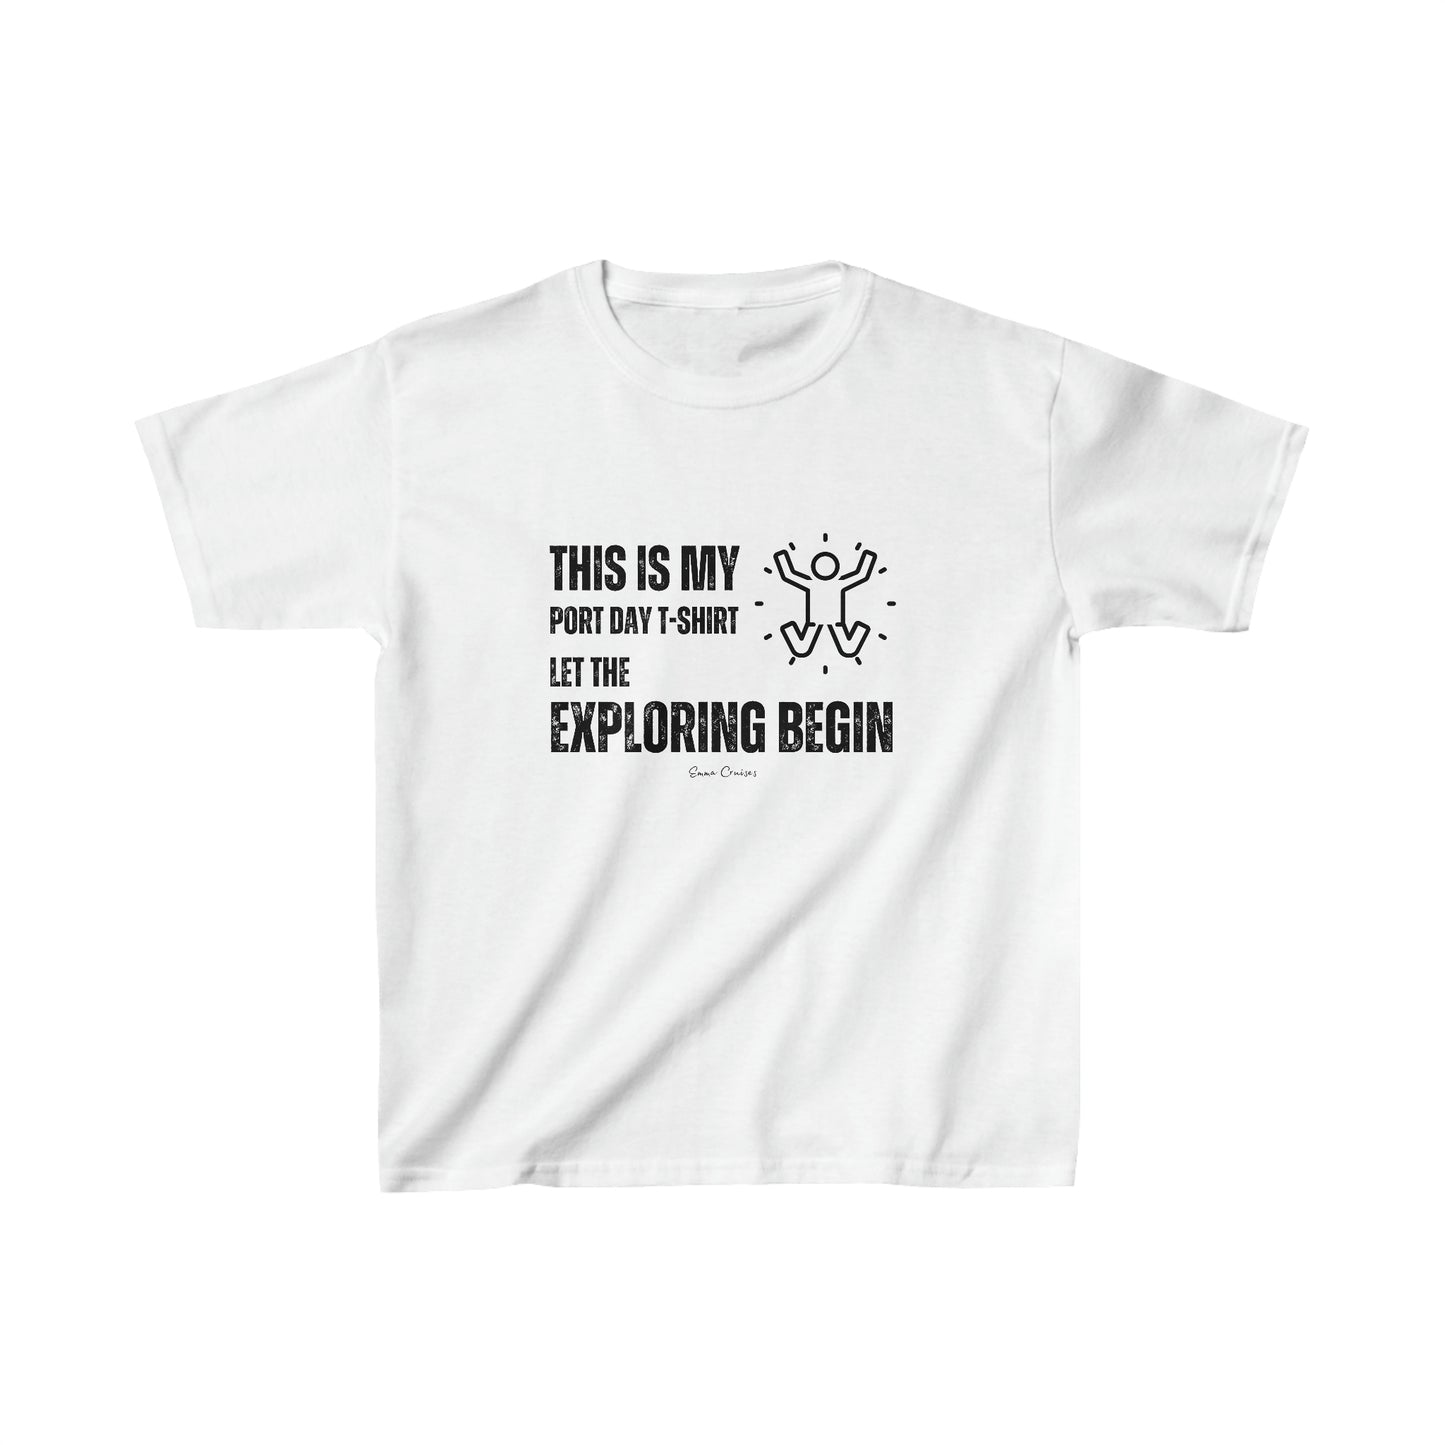 This is My Port Day T-Shirt - Kids UNISEX T-Shirt